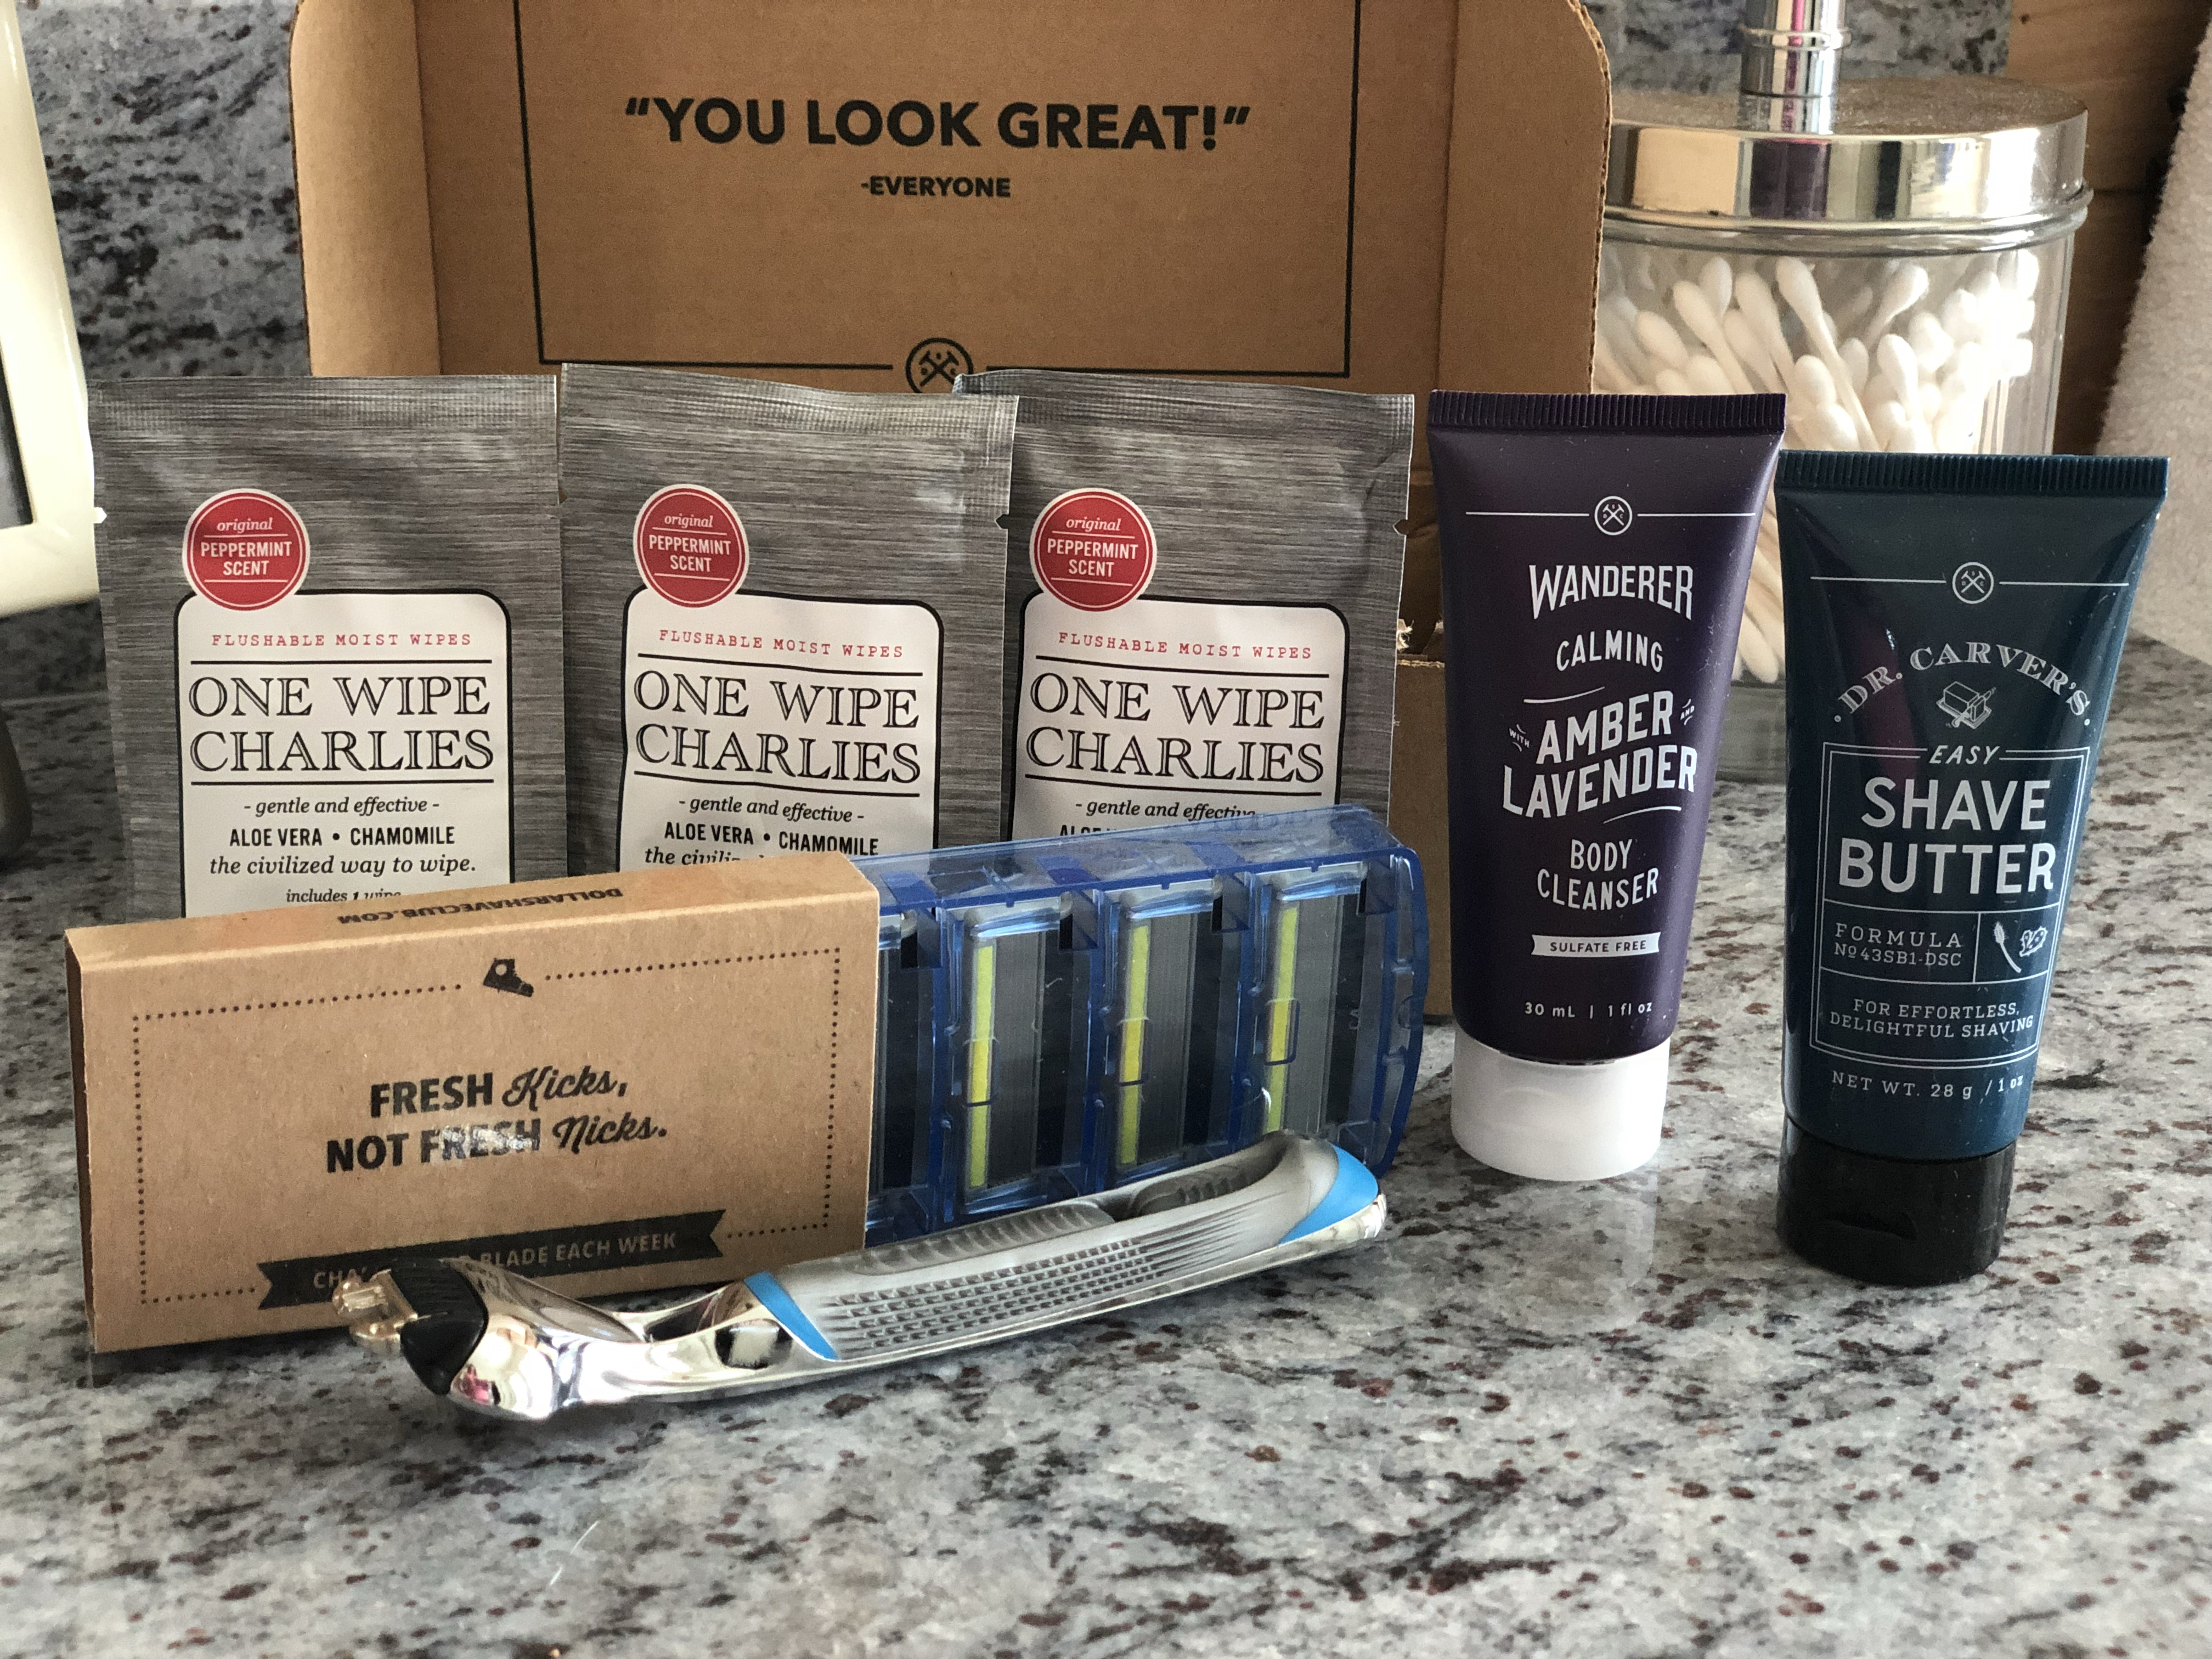 All this ONLY $5 from Dollar Shave Club!